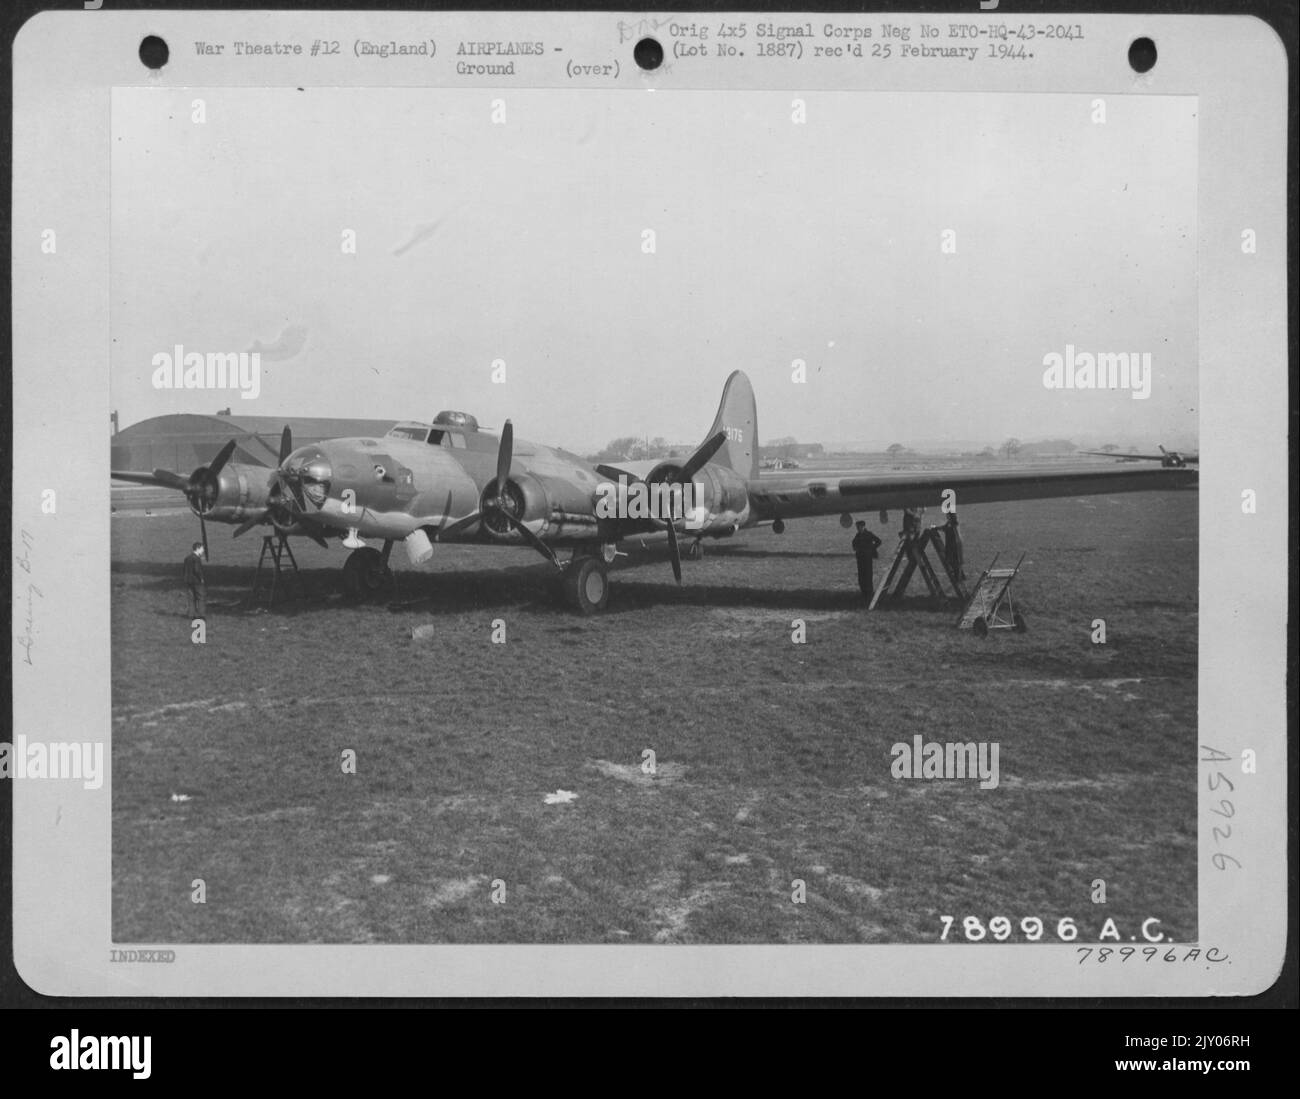 Front View Of A Boeing B-17 'Flying Fortress' At Burtonwood Airdrome, England. 16 March 1943. Stock Photo